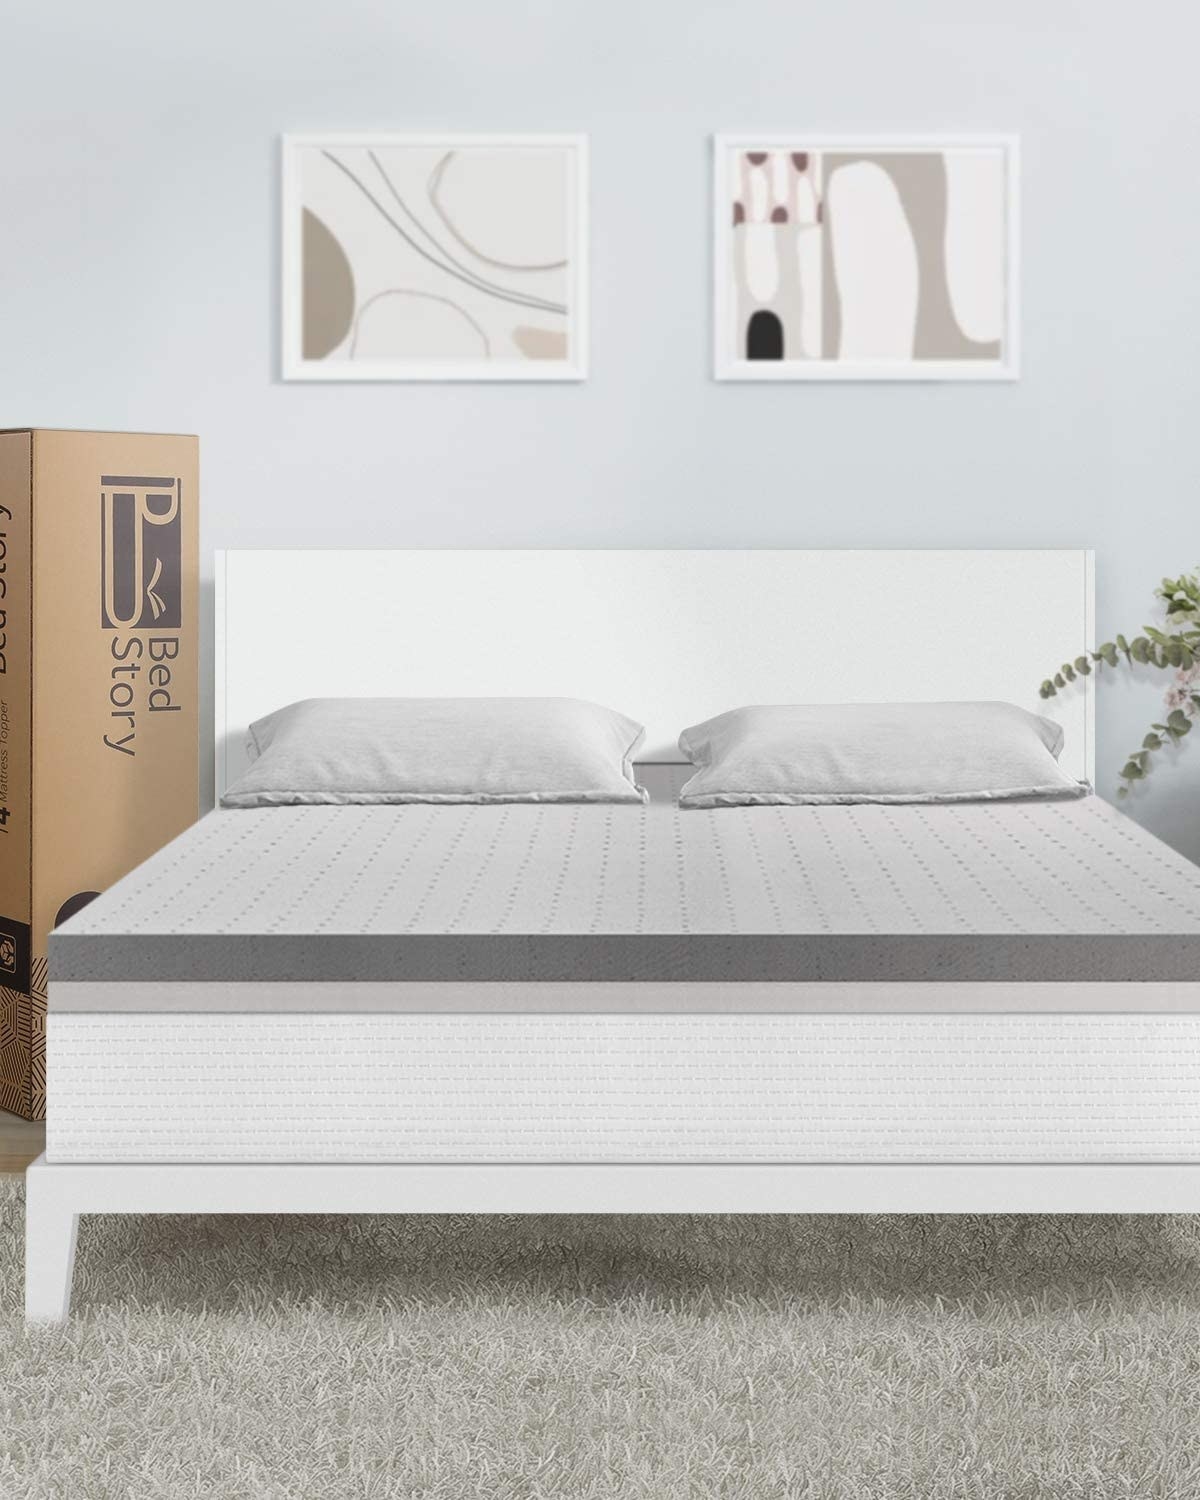 A bed with a mattress topper and pillows on it